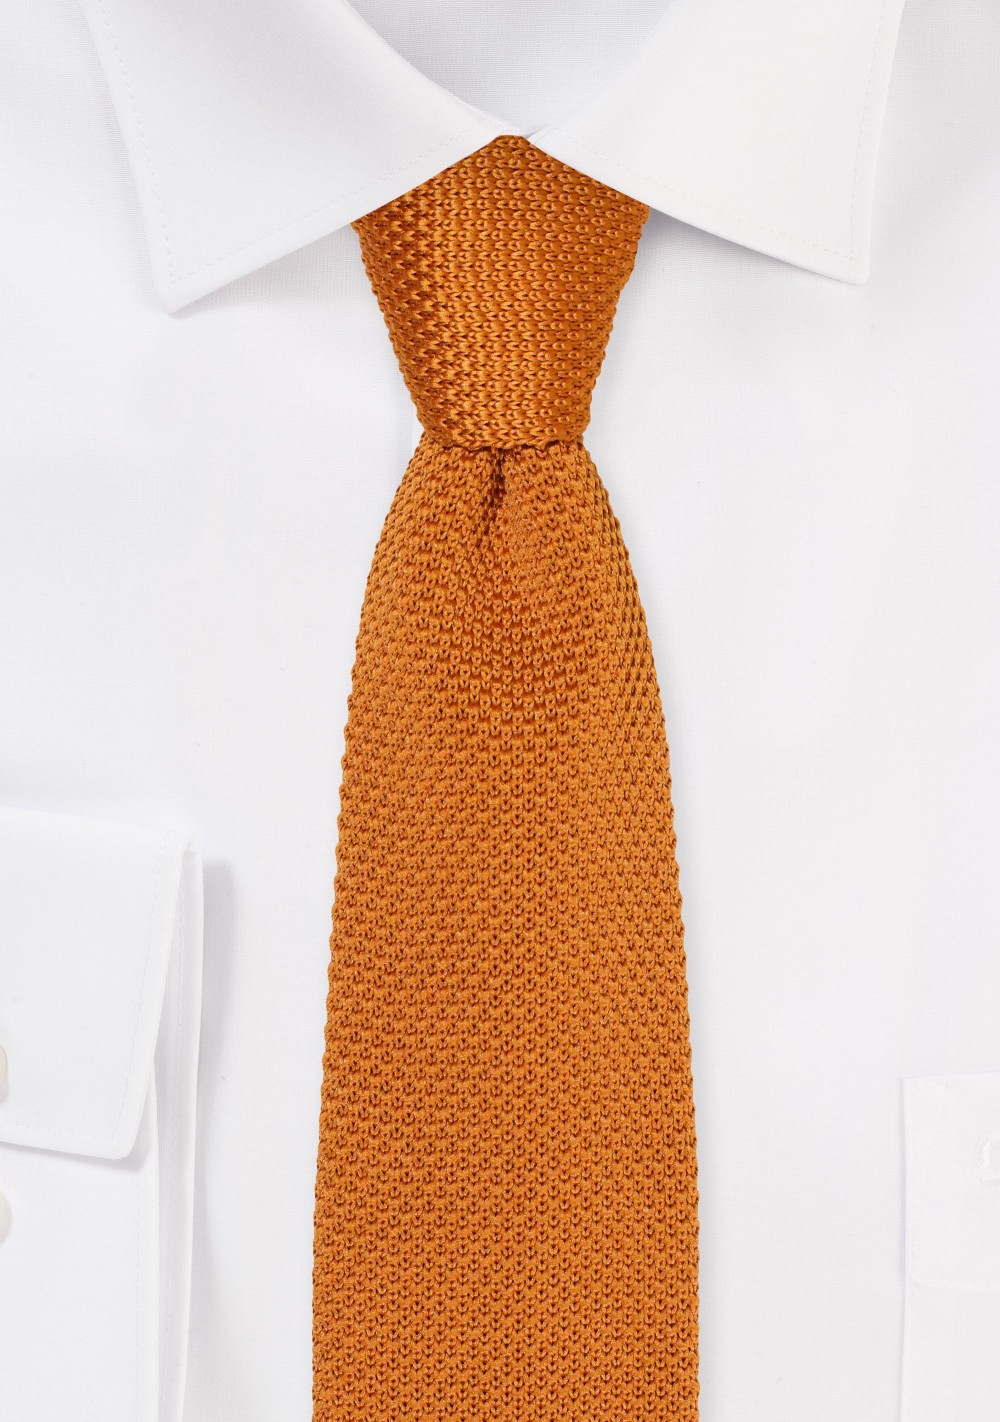 Cinnamon Knit Tie with Pointed Tip